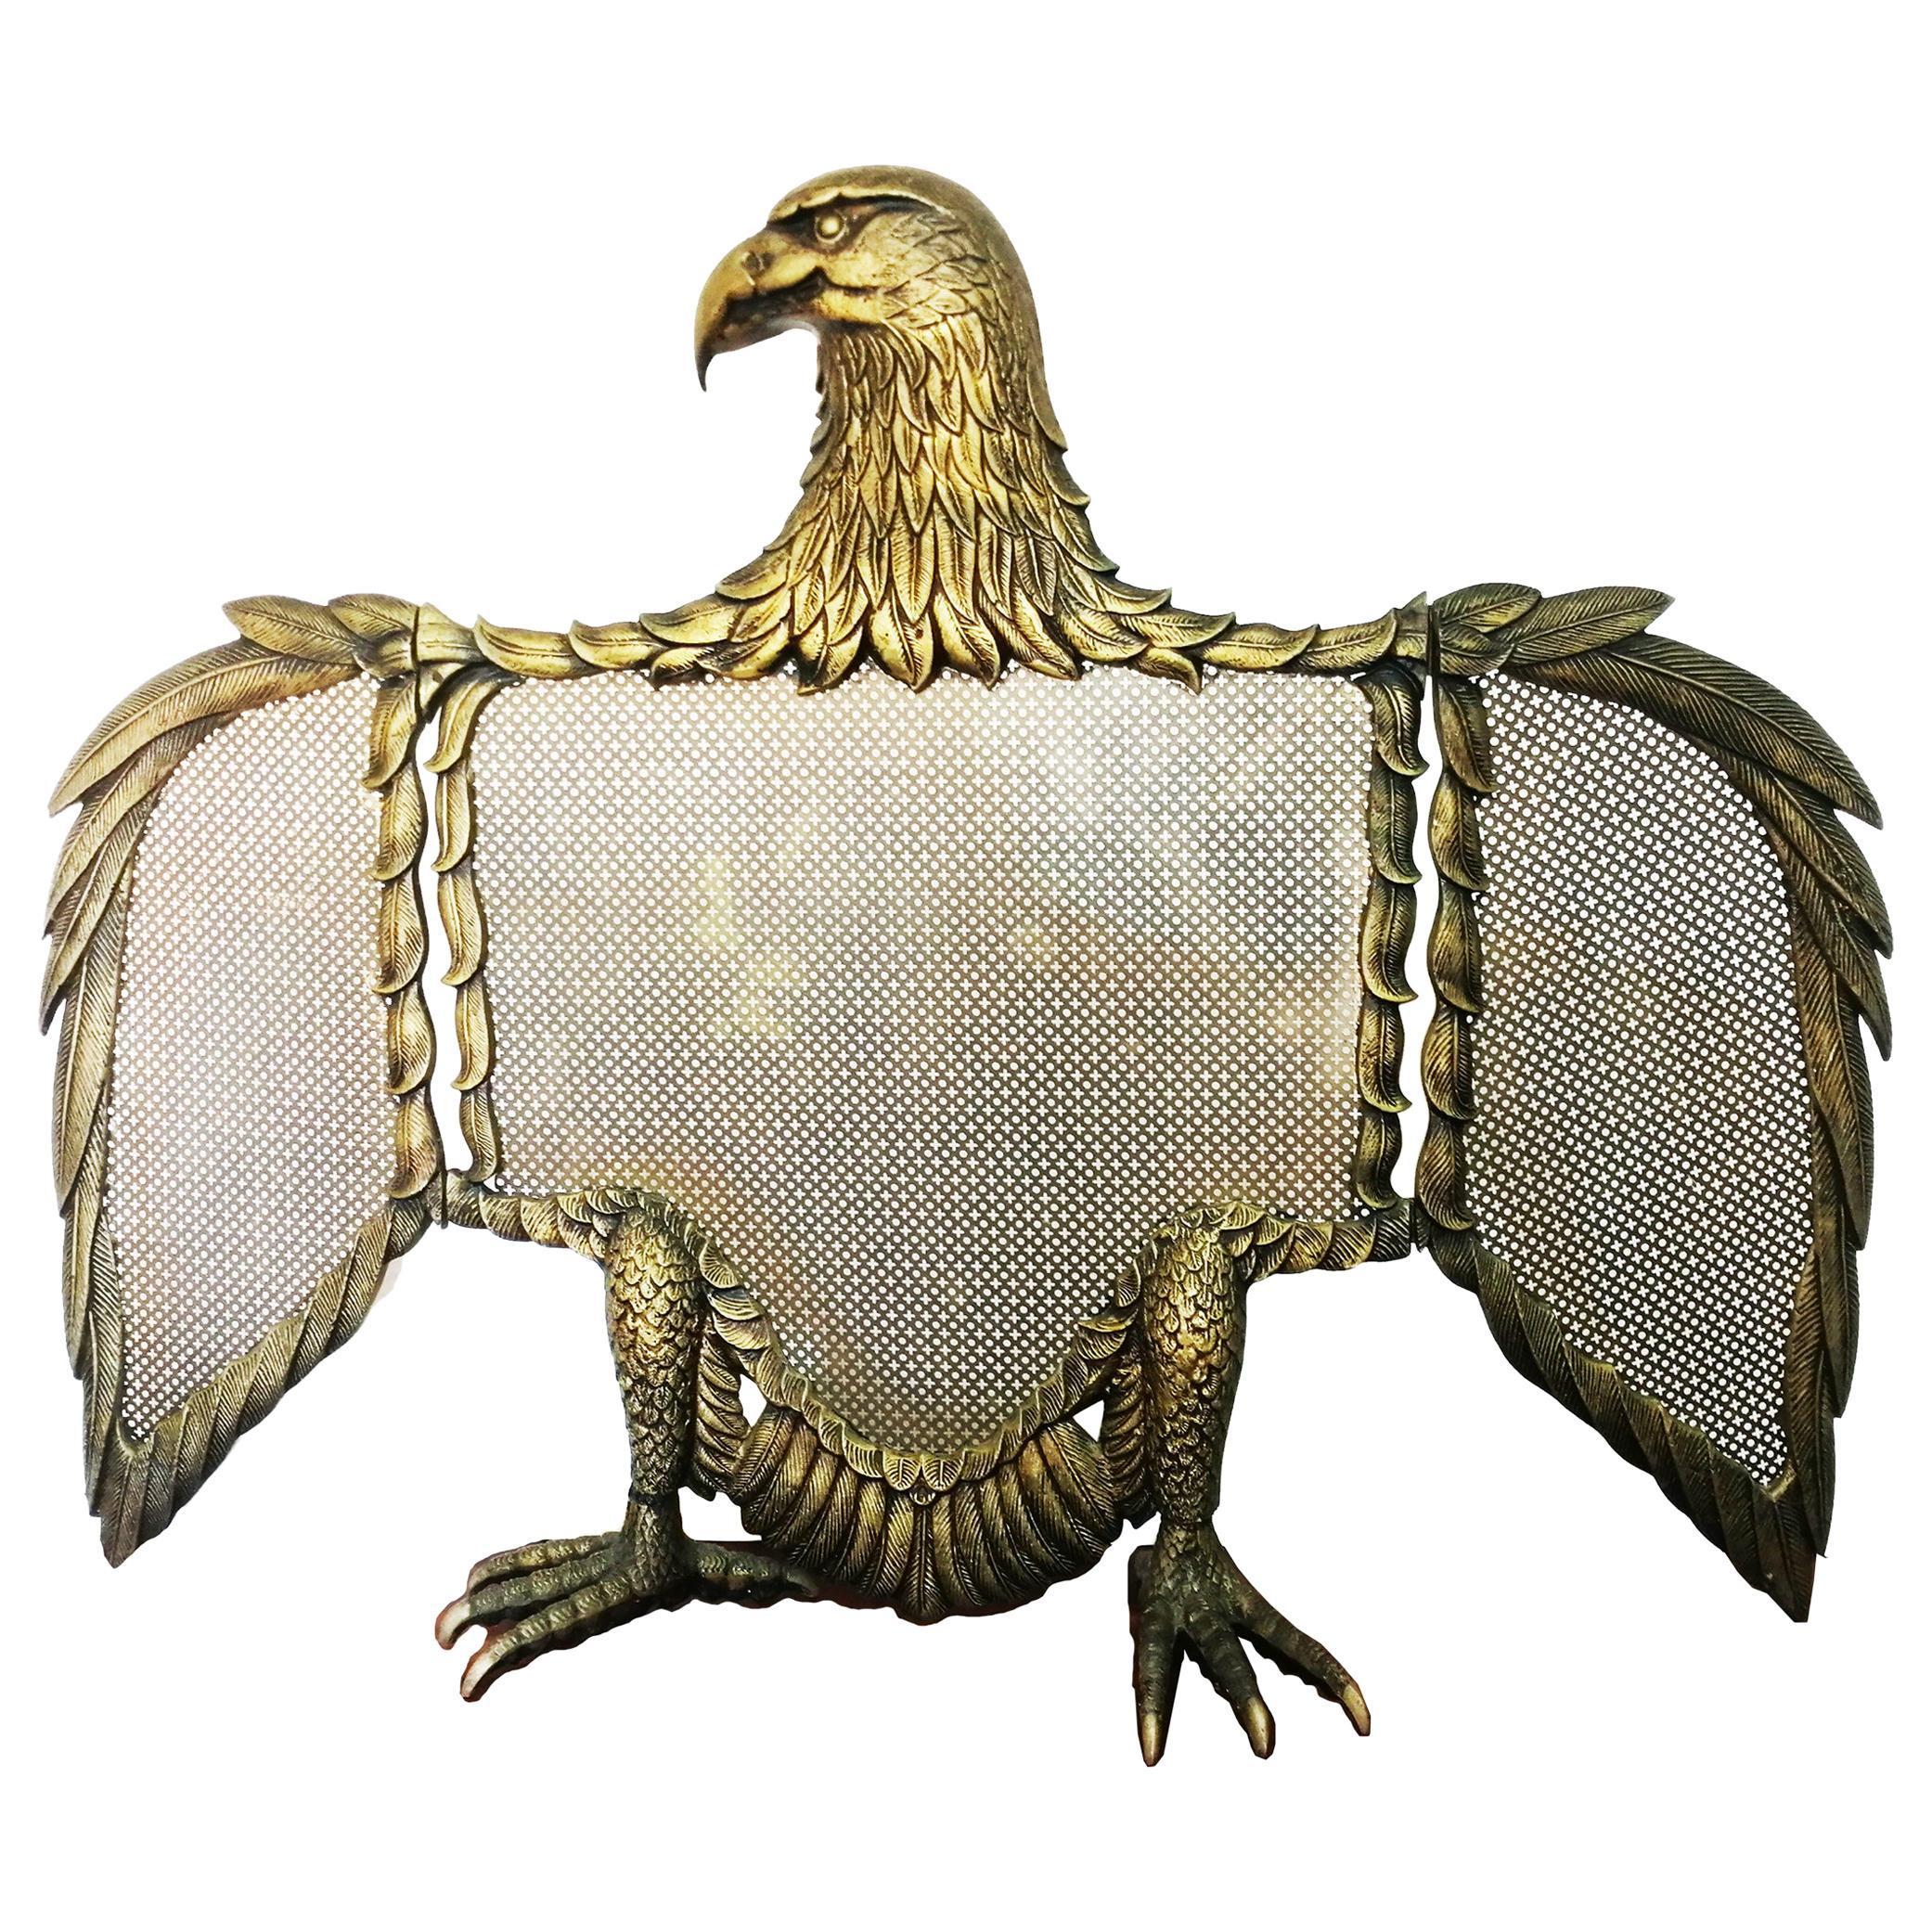 Three-panel fire screen bronze or brass eagle-shaped sparks

Save bronze or brass eagle-shaped sparks with open wings that fold.
FireSceen ,original, 